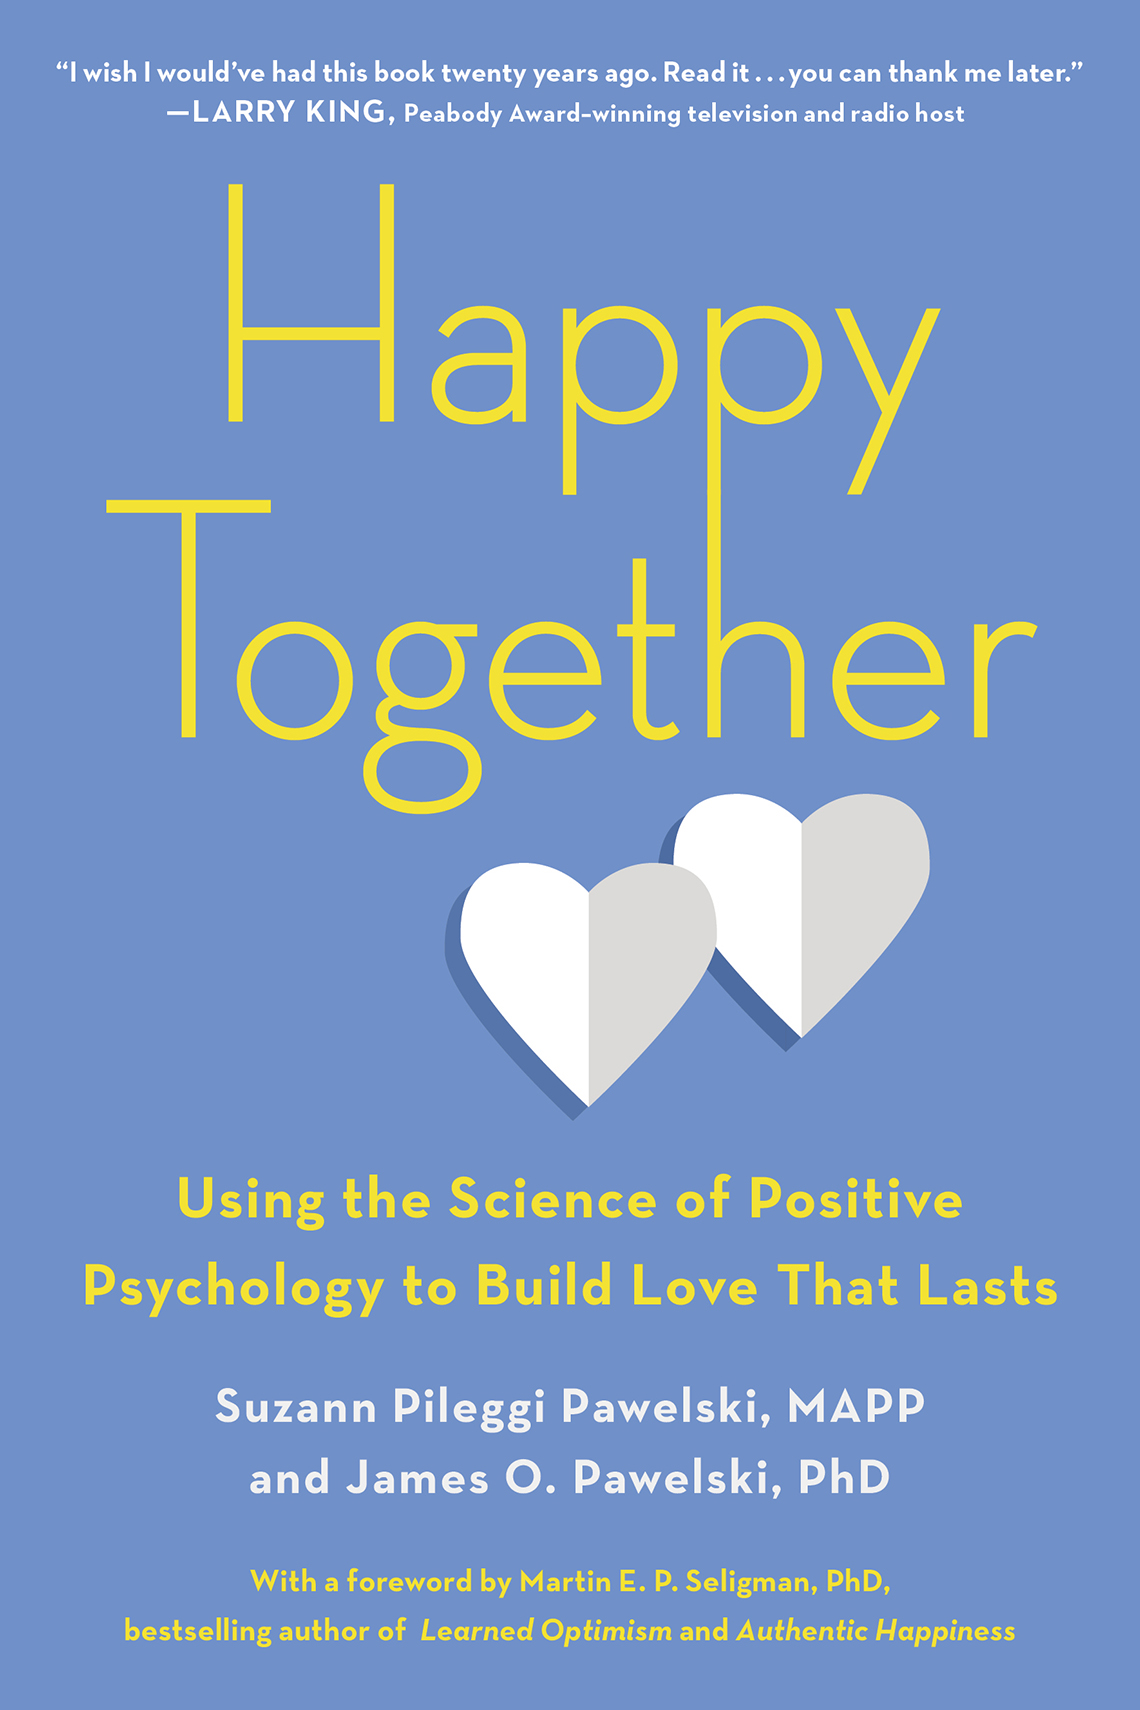 Happy Together by Suzaan Pileggi Pawelski. Blue book cover with two folded paper hearts